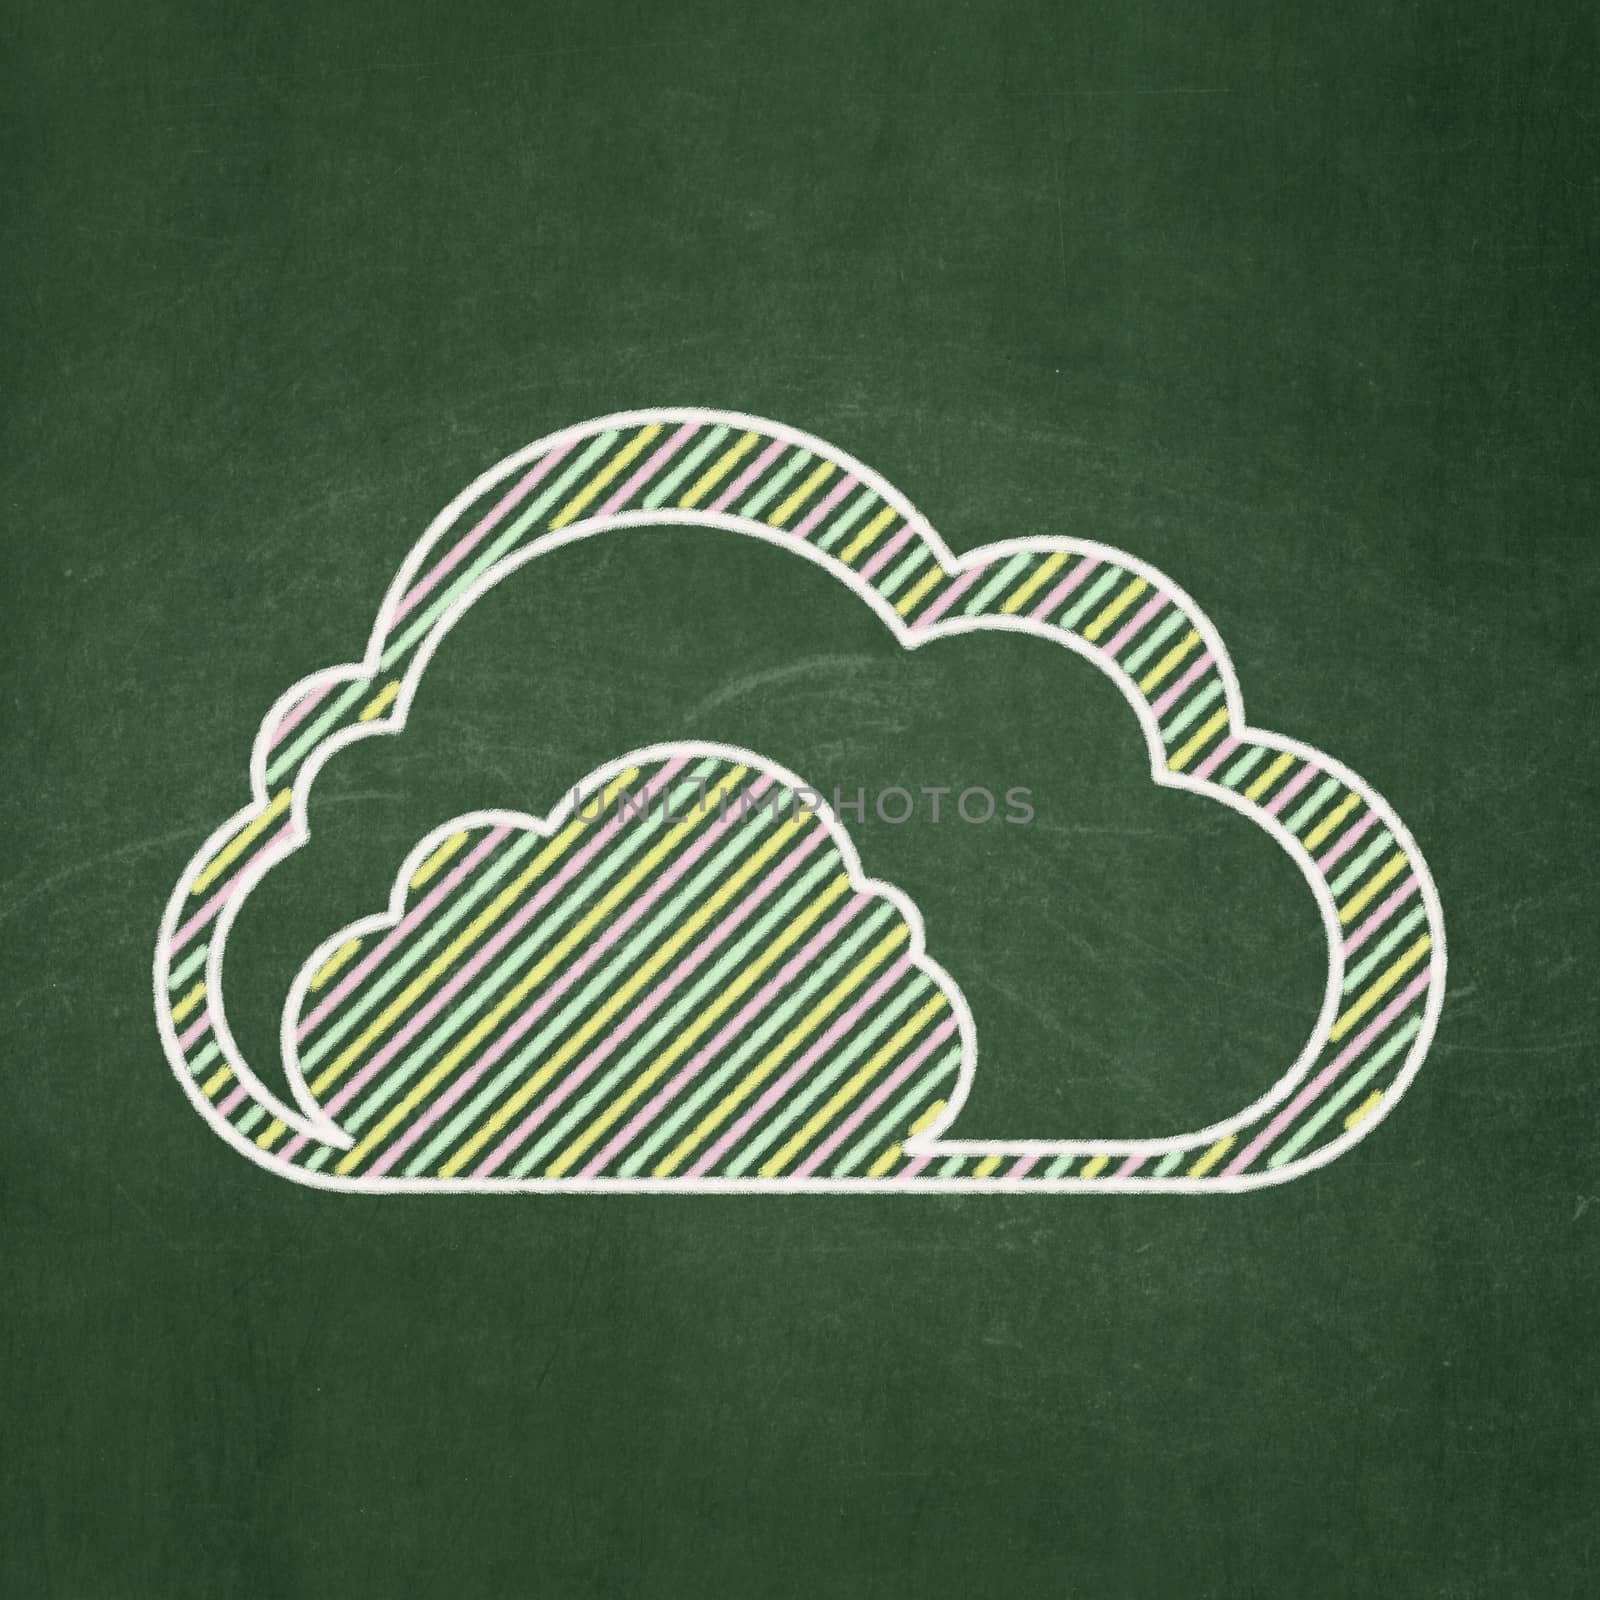 Cloud technology concept: Cloud icon on Green chalkboard background, 3d render